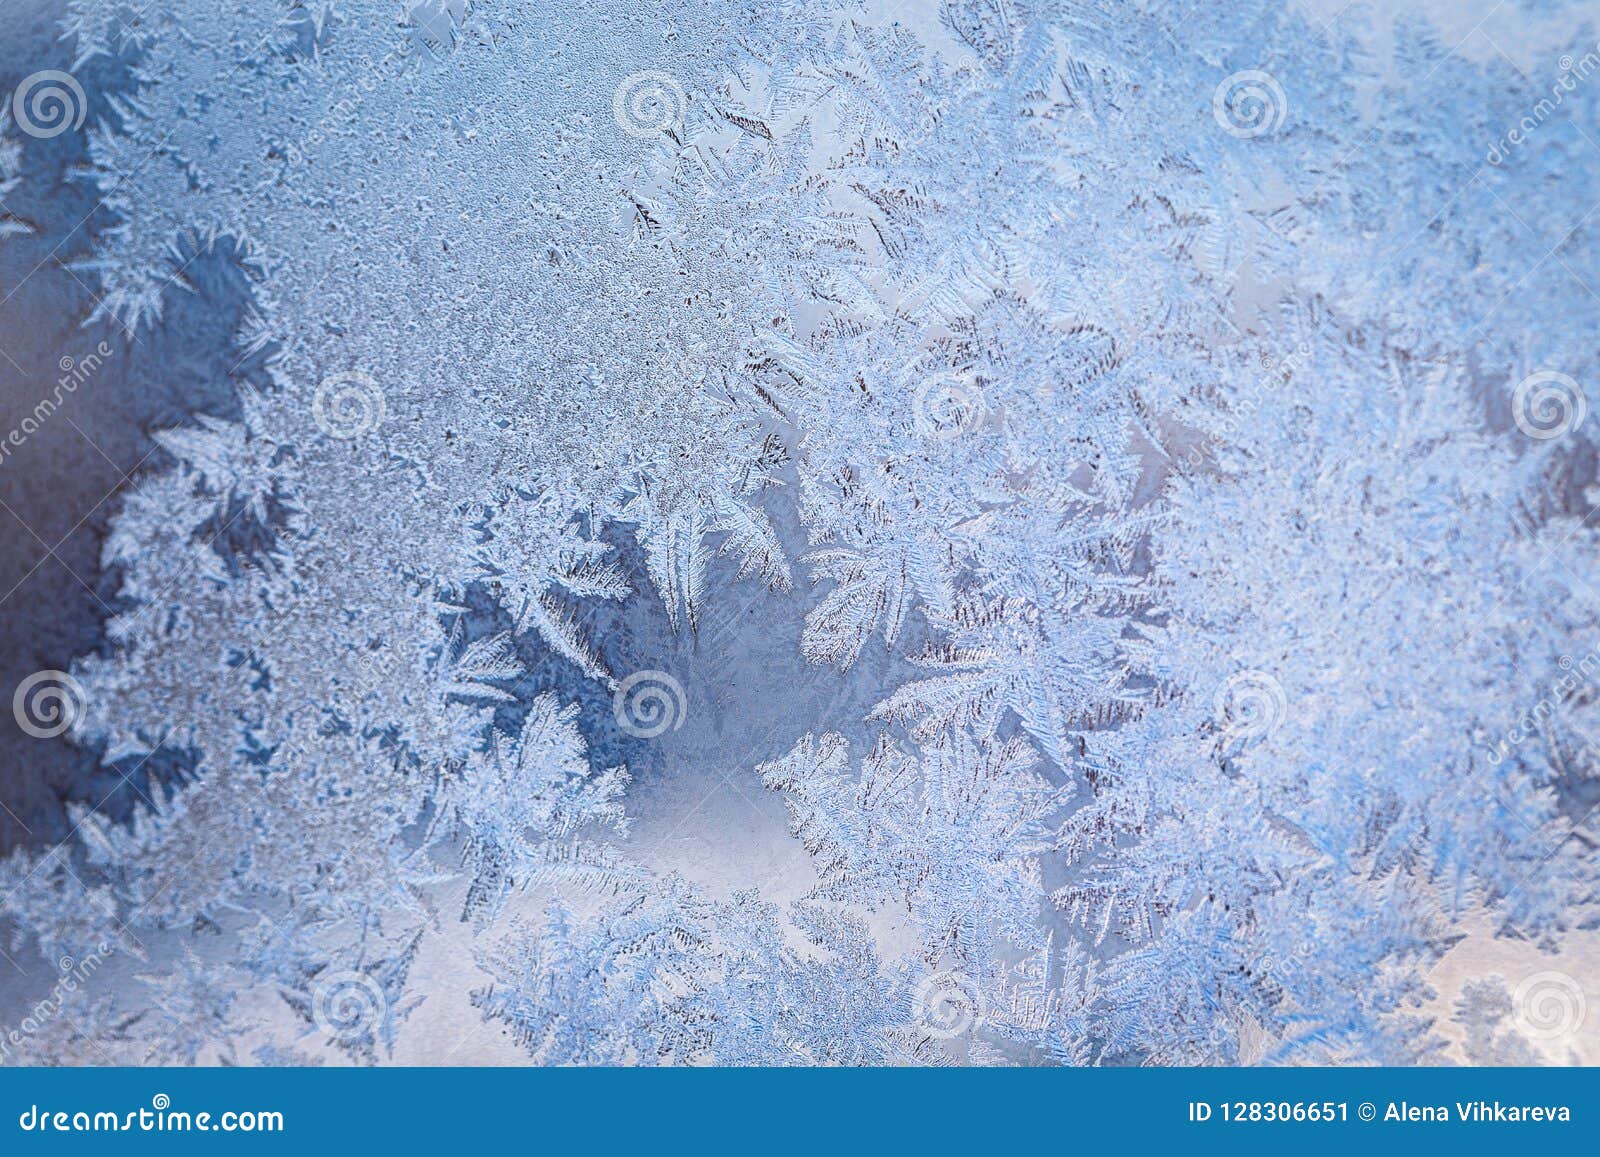 Winter Ice Pattern on the Frozen Window. Stock Image - Image of glass,  design: 128306651